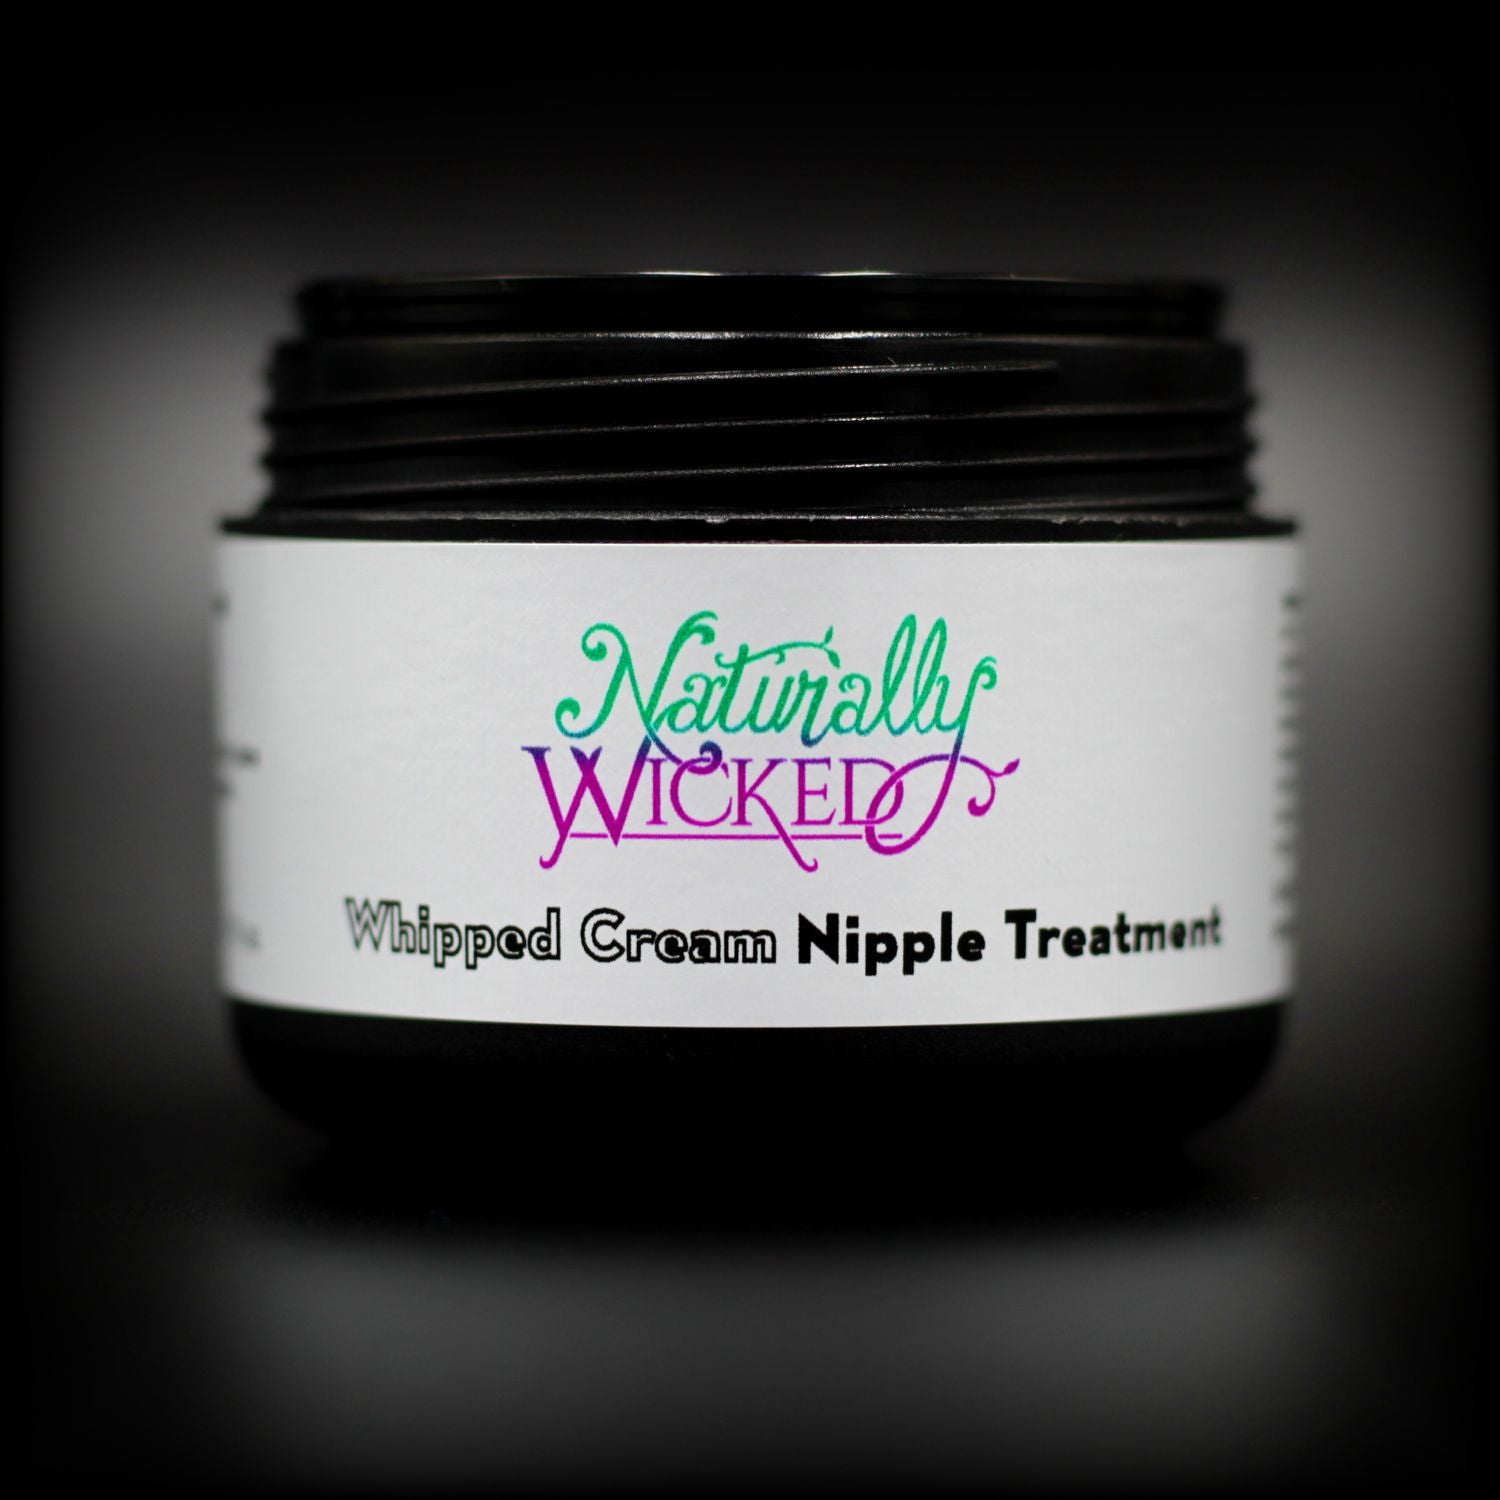 Naturally Wicked Whipped Cream Nipple Treatment Container Without Lid Exposing Seal & Screw Connection